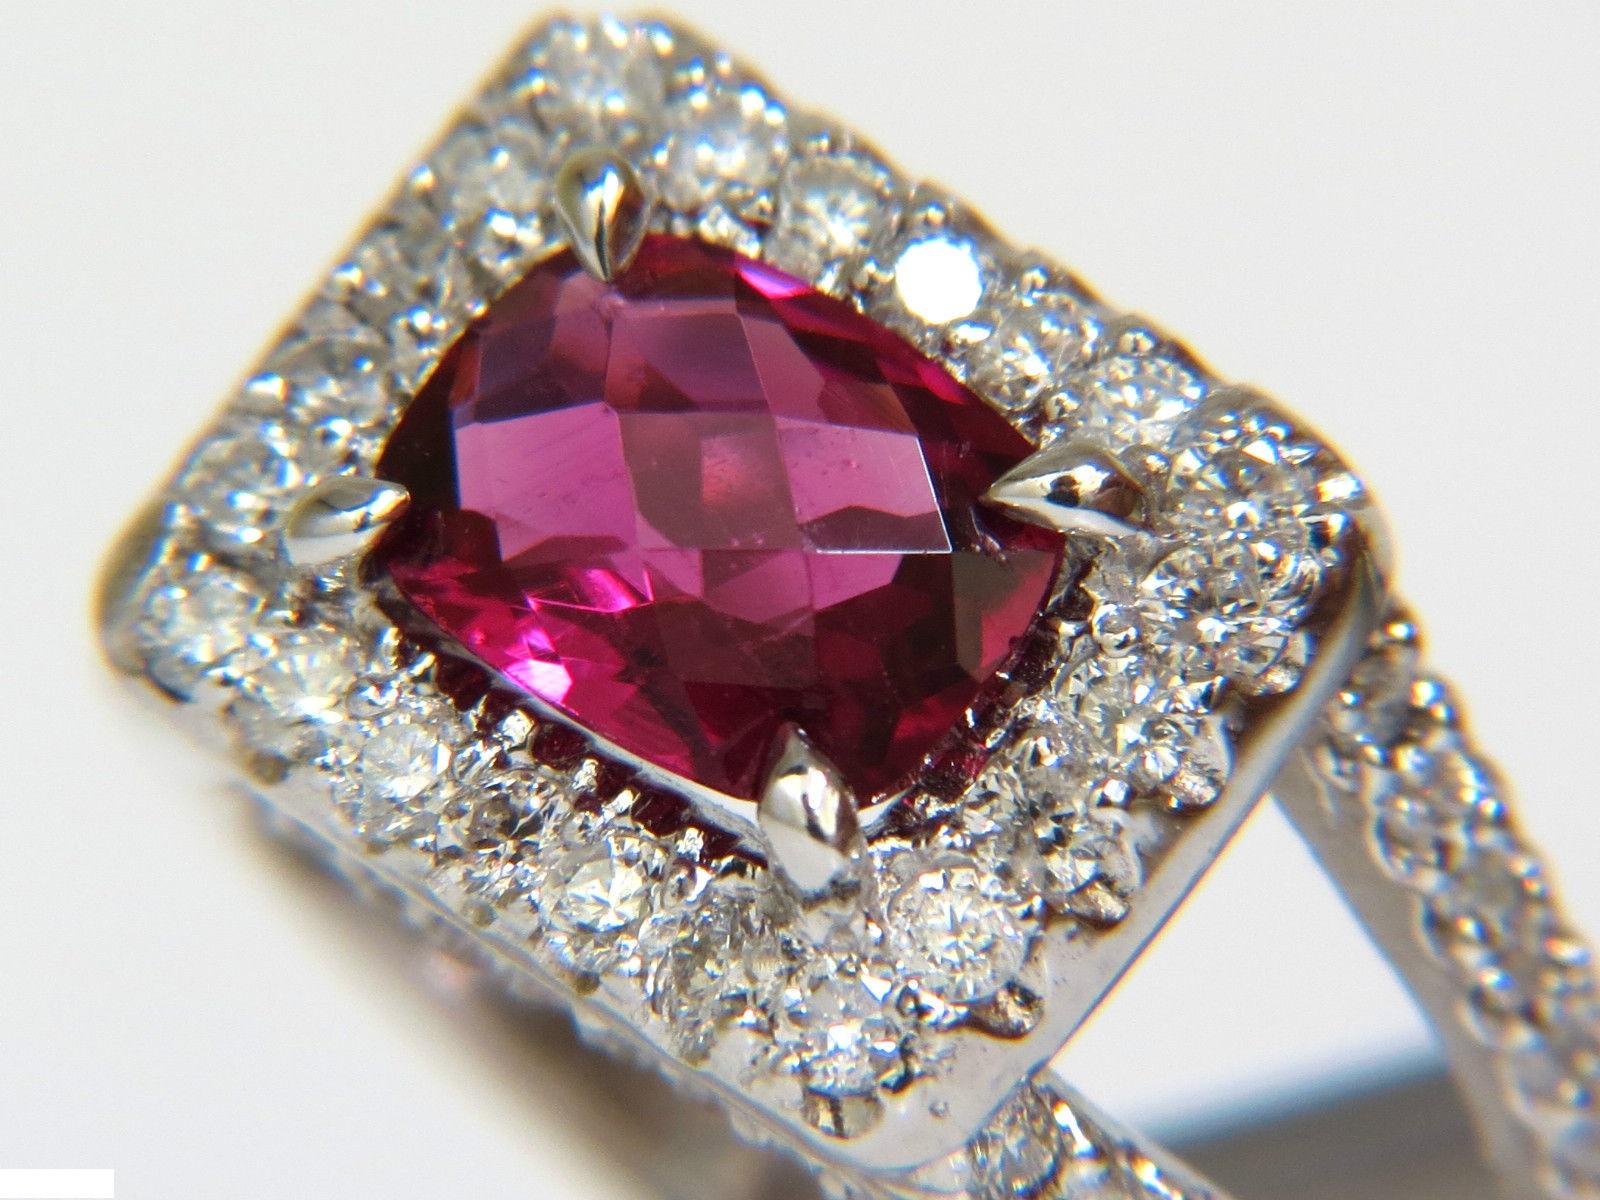 1.23ct. Natural Bright Pink Tourmaline

Very clean clarity

A+ superb transparency

Long checkerboard cut, Fully Faceted and brilliant sparkles throughout

The Fine Gem Tourmaline

8.0 X 6.0mm



1.50ct. diamonds.

Rounds and full cuts.

G color,